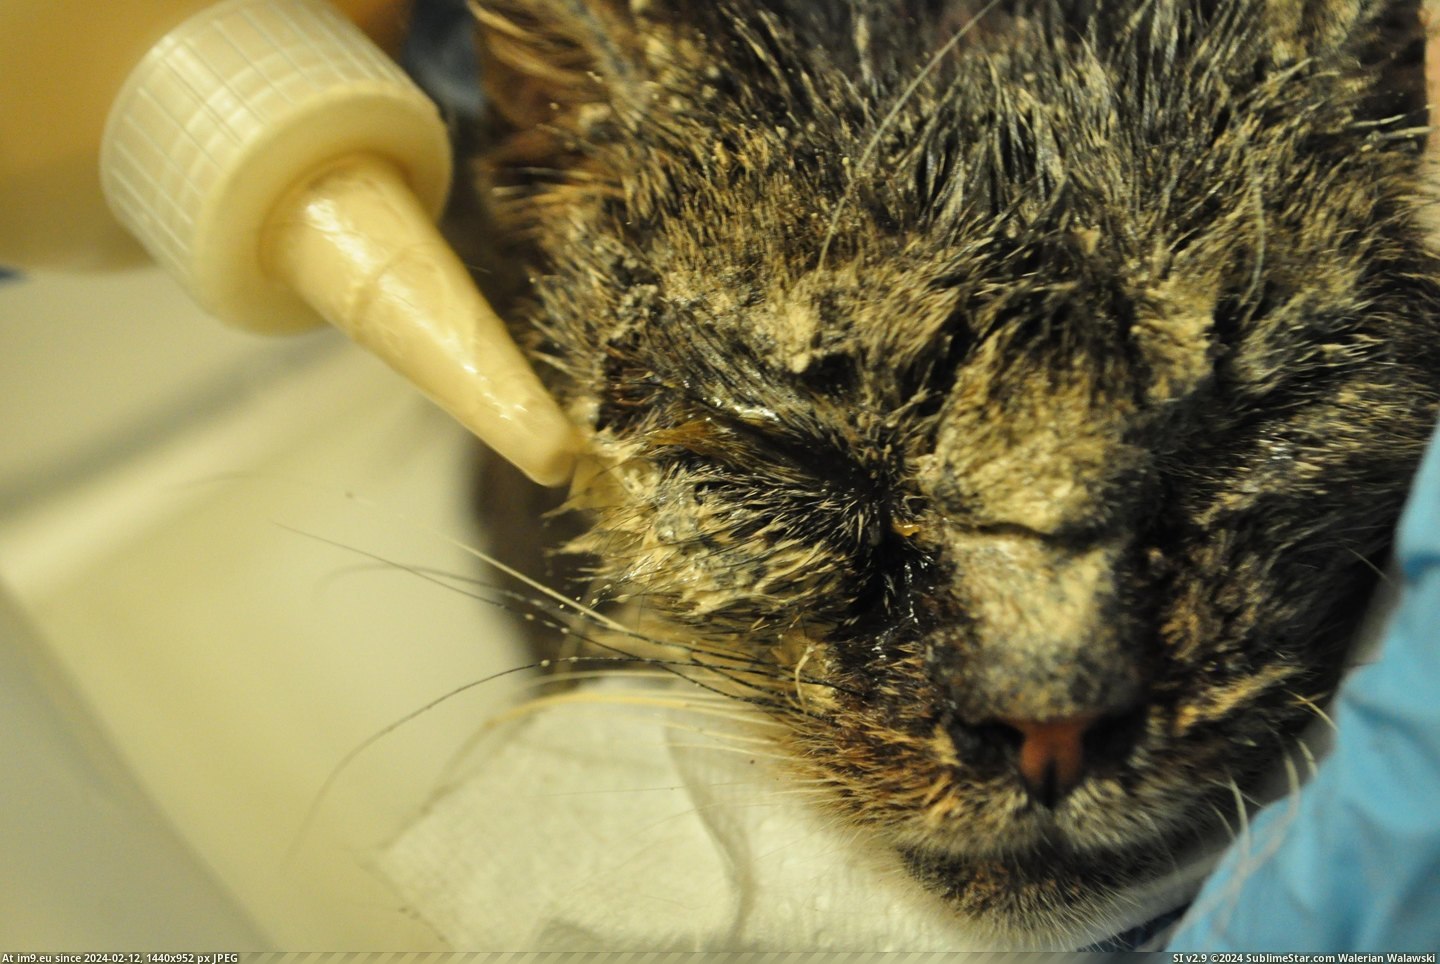 #Cats #Cat #Life #Helped #Dying #Blind #Starved #Kitten #Stray #Save [Cats] Mr. Cat - The Dying, Starved, and Blind Stray Kitten we found, and how Reddit helped save his life. 1 Pic. (Изображение из альбом My r/CATS favs))